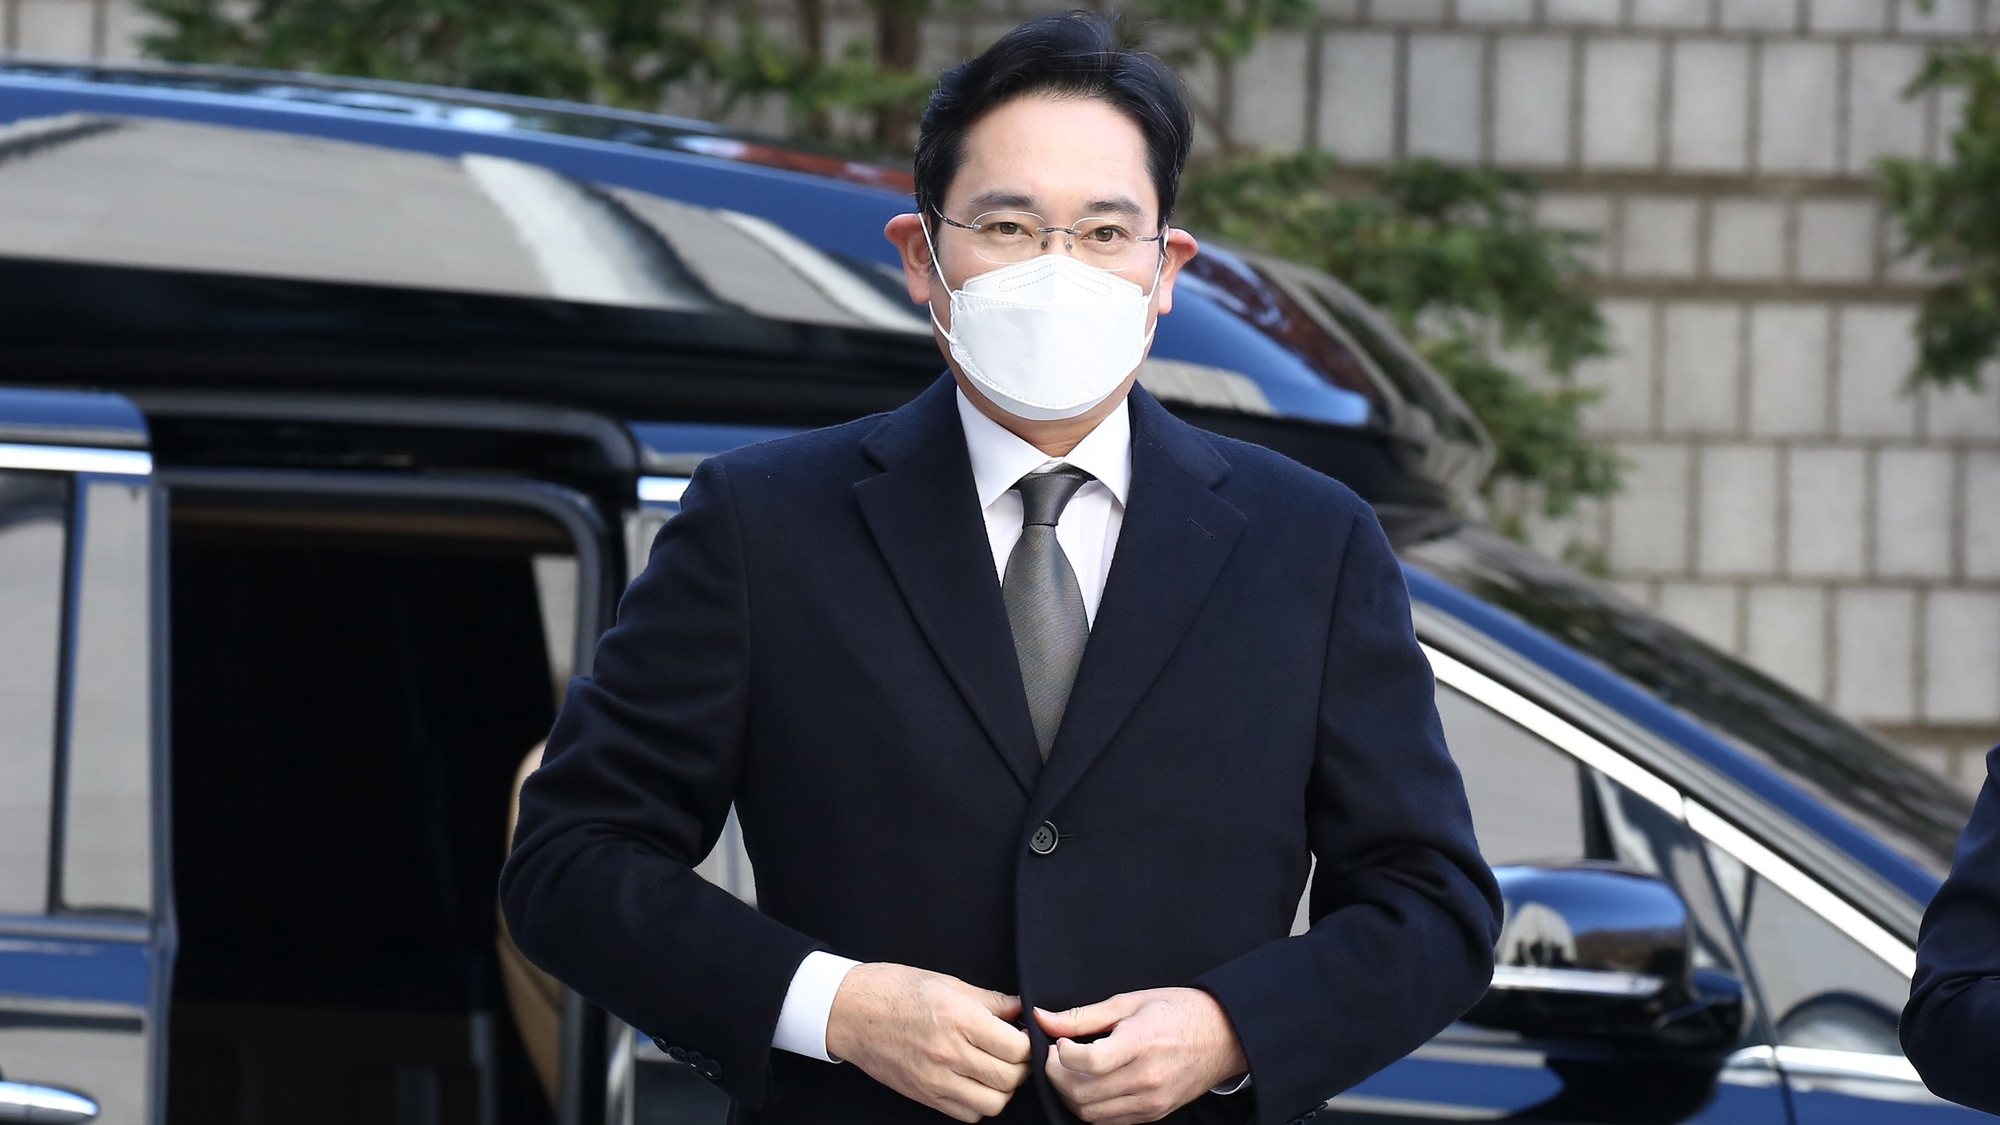 epa08852325 Lee Jae-yong, vice chairman of Samsung Group, arrives to attend a court hearing to review at the Seoul High Court in Seoul, South Korea, 30 November 2020.  EPA/KIM CHUL-SOO